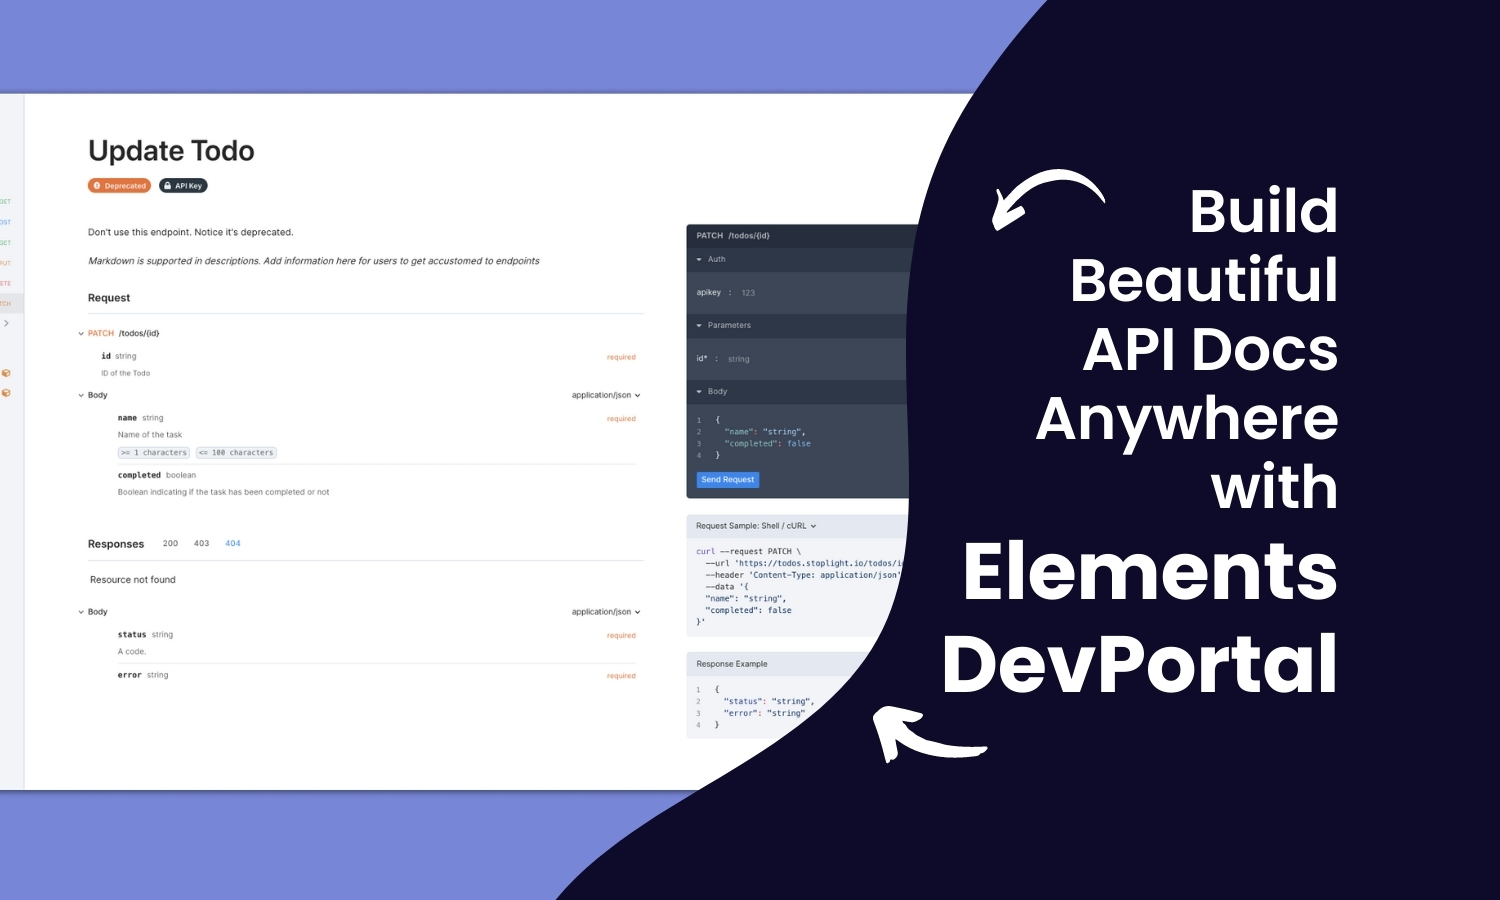 Build Beautiful API Docs Anywhere with Elements DevPortal